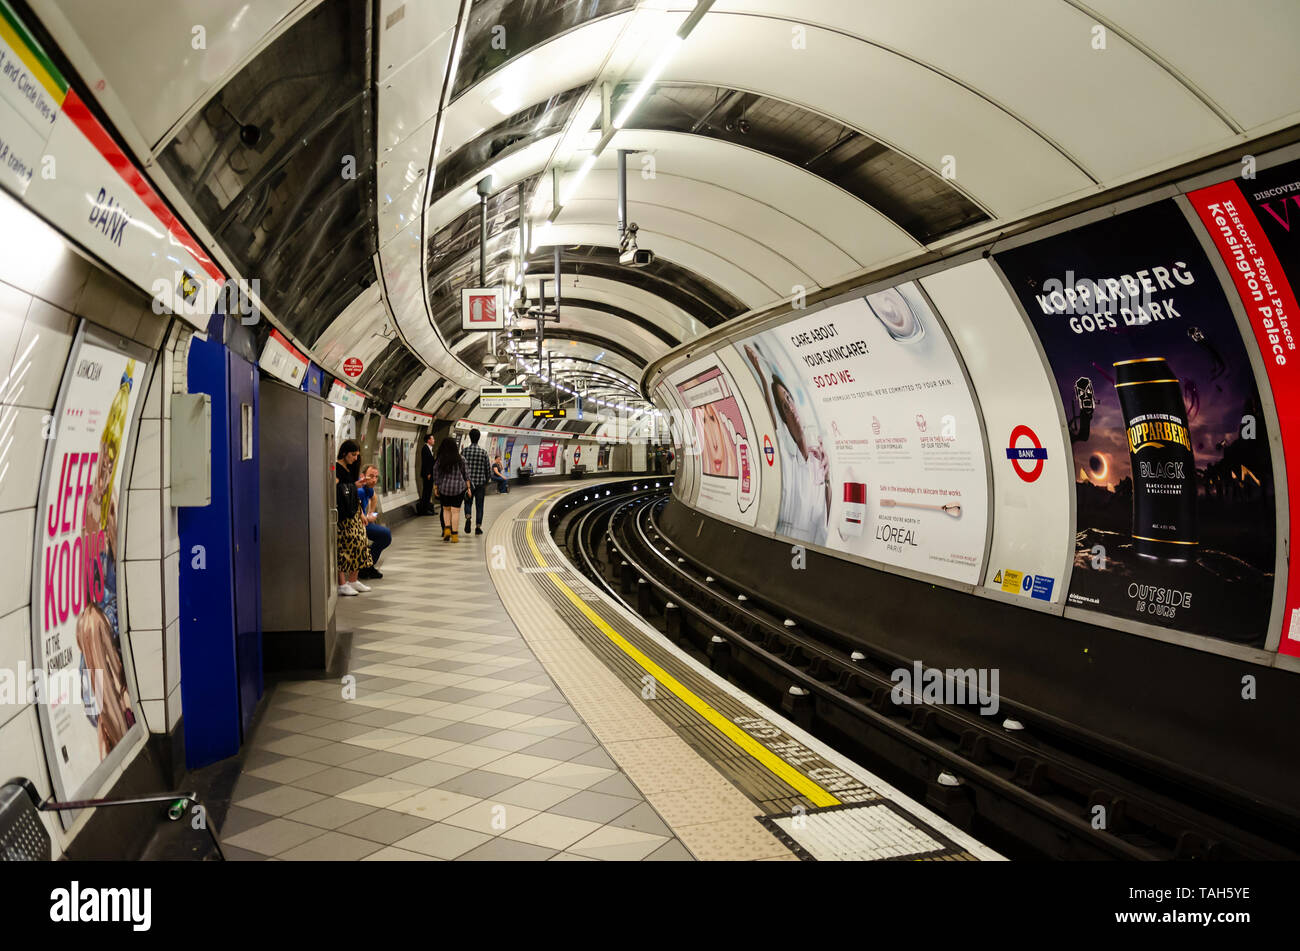 A view of a relatively quiet platform at Bank London Underground Station on the Central Line. Stock Photo